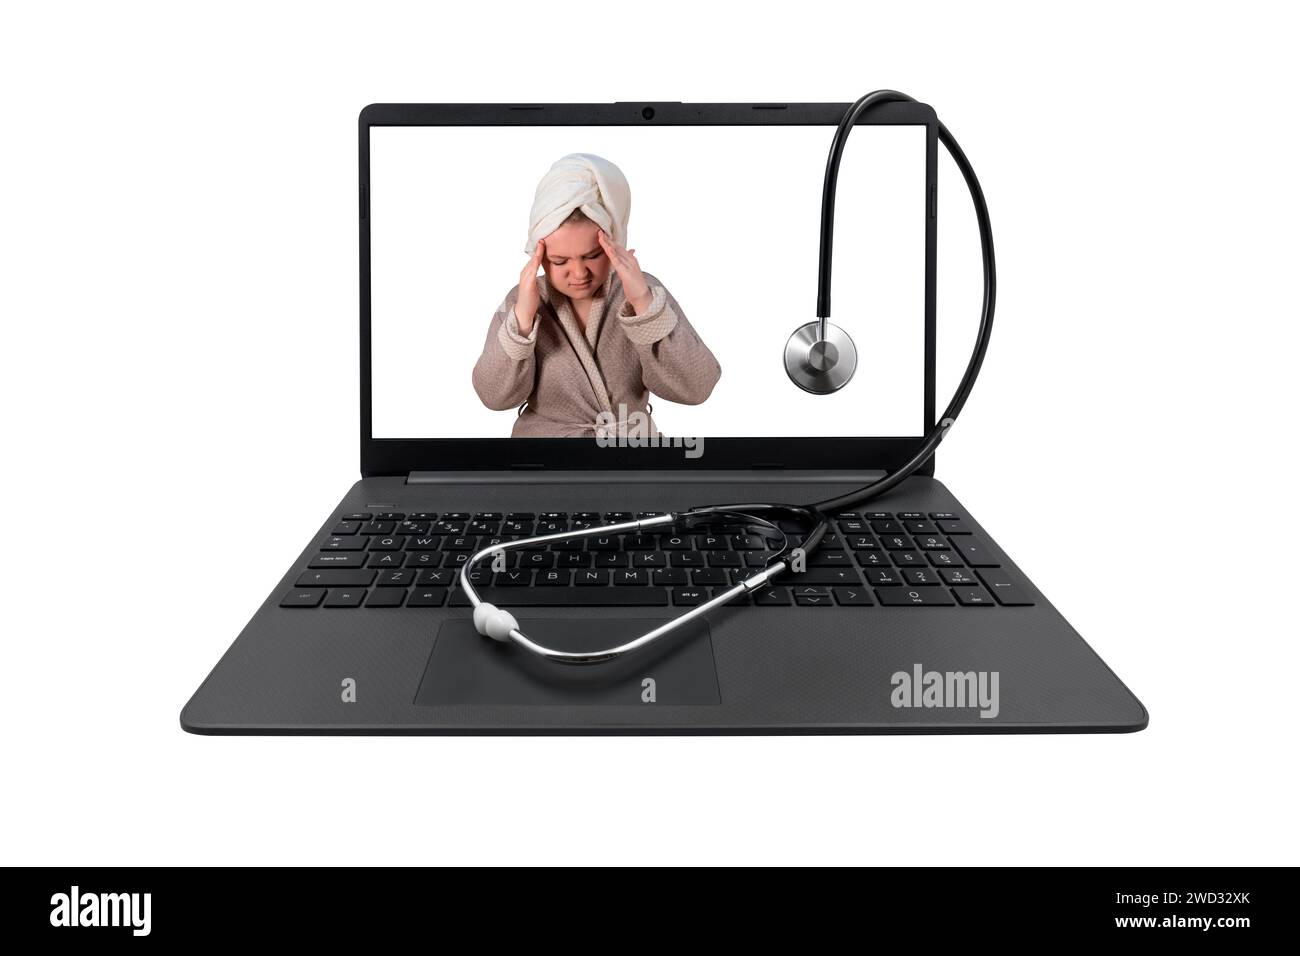 Laptop and medical stethoscope isolated on white background. On the laptop screen - a girl in a bathrobe clasped her head in her hands (headache) Stock Photo